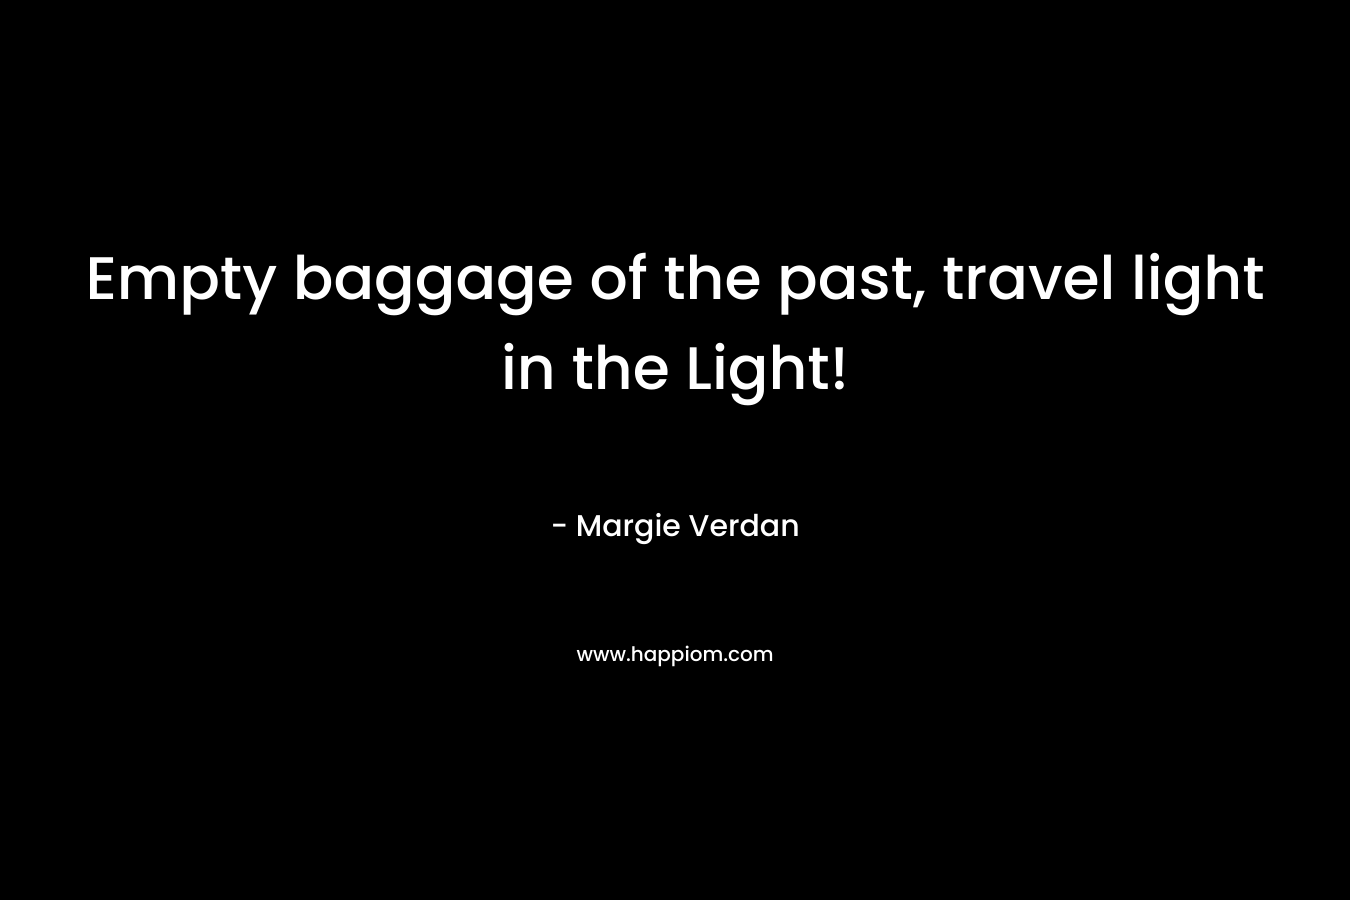 Empty baggage of the past, travel light in the Light!